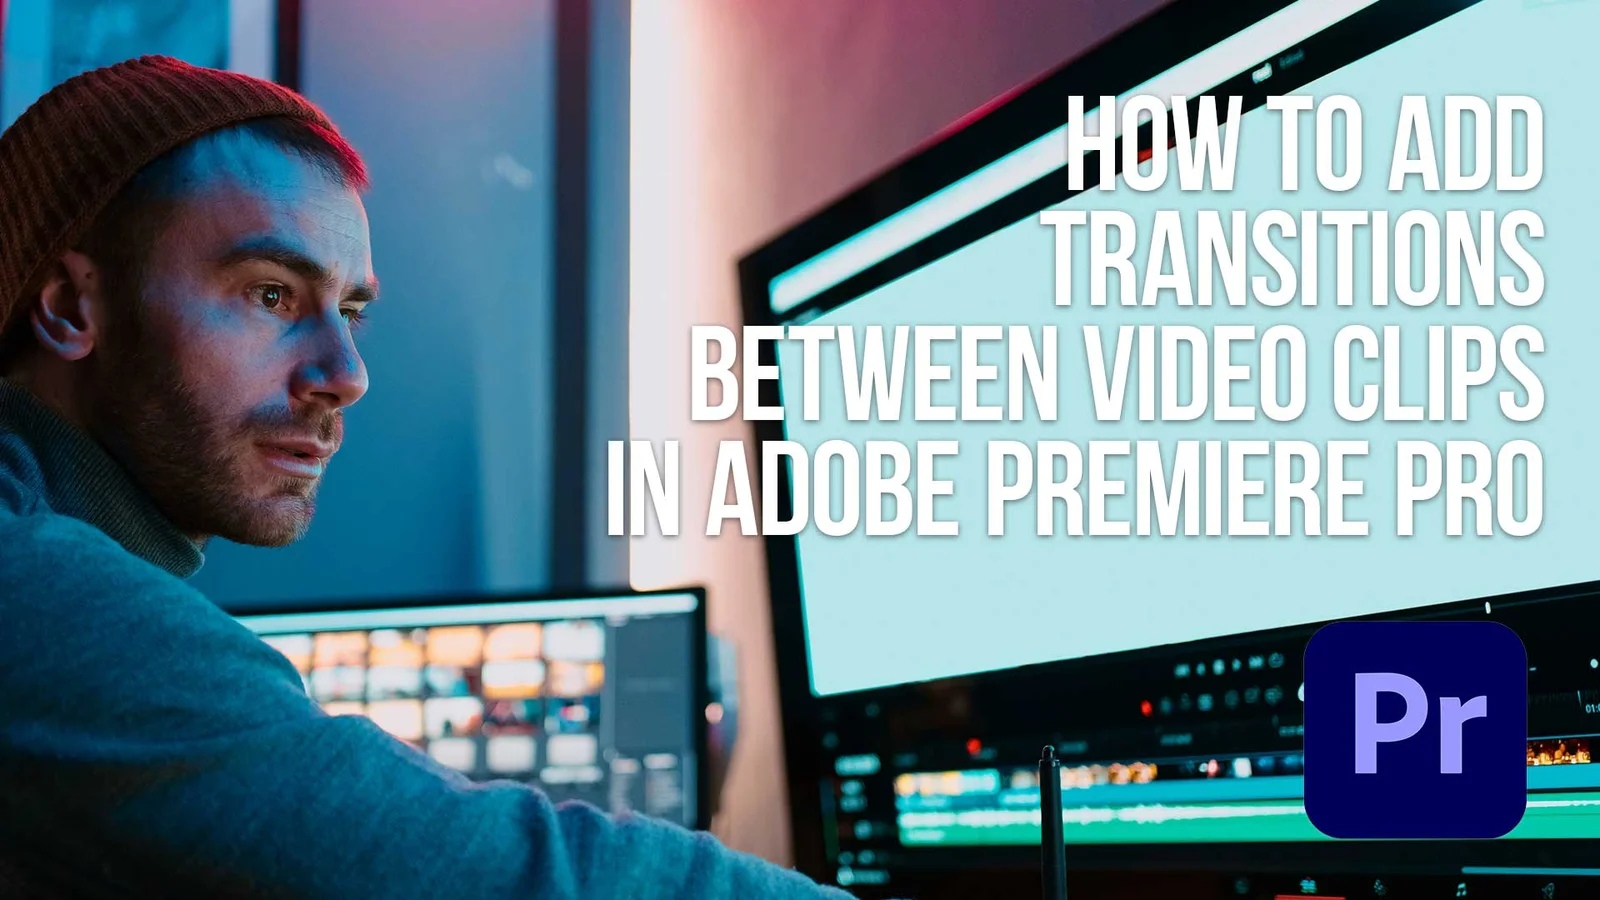 How to Add Transitions Between Video Clips in Adobe Premiere Pro